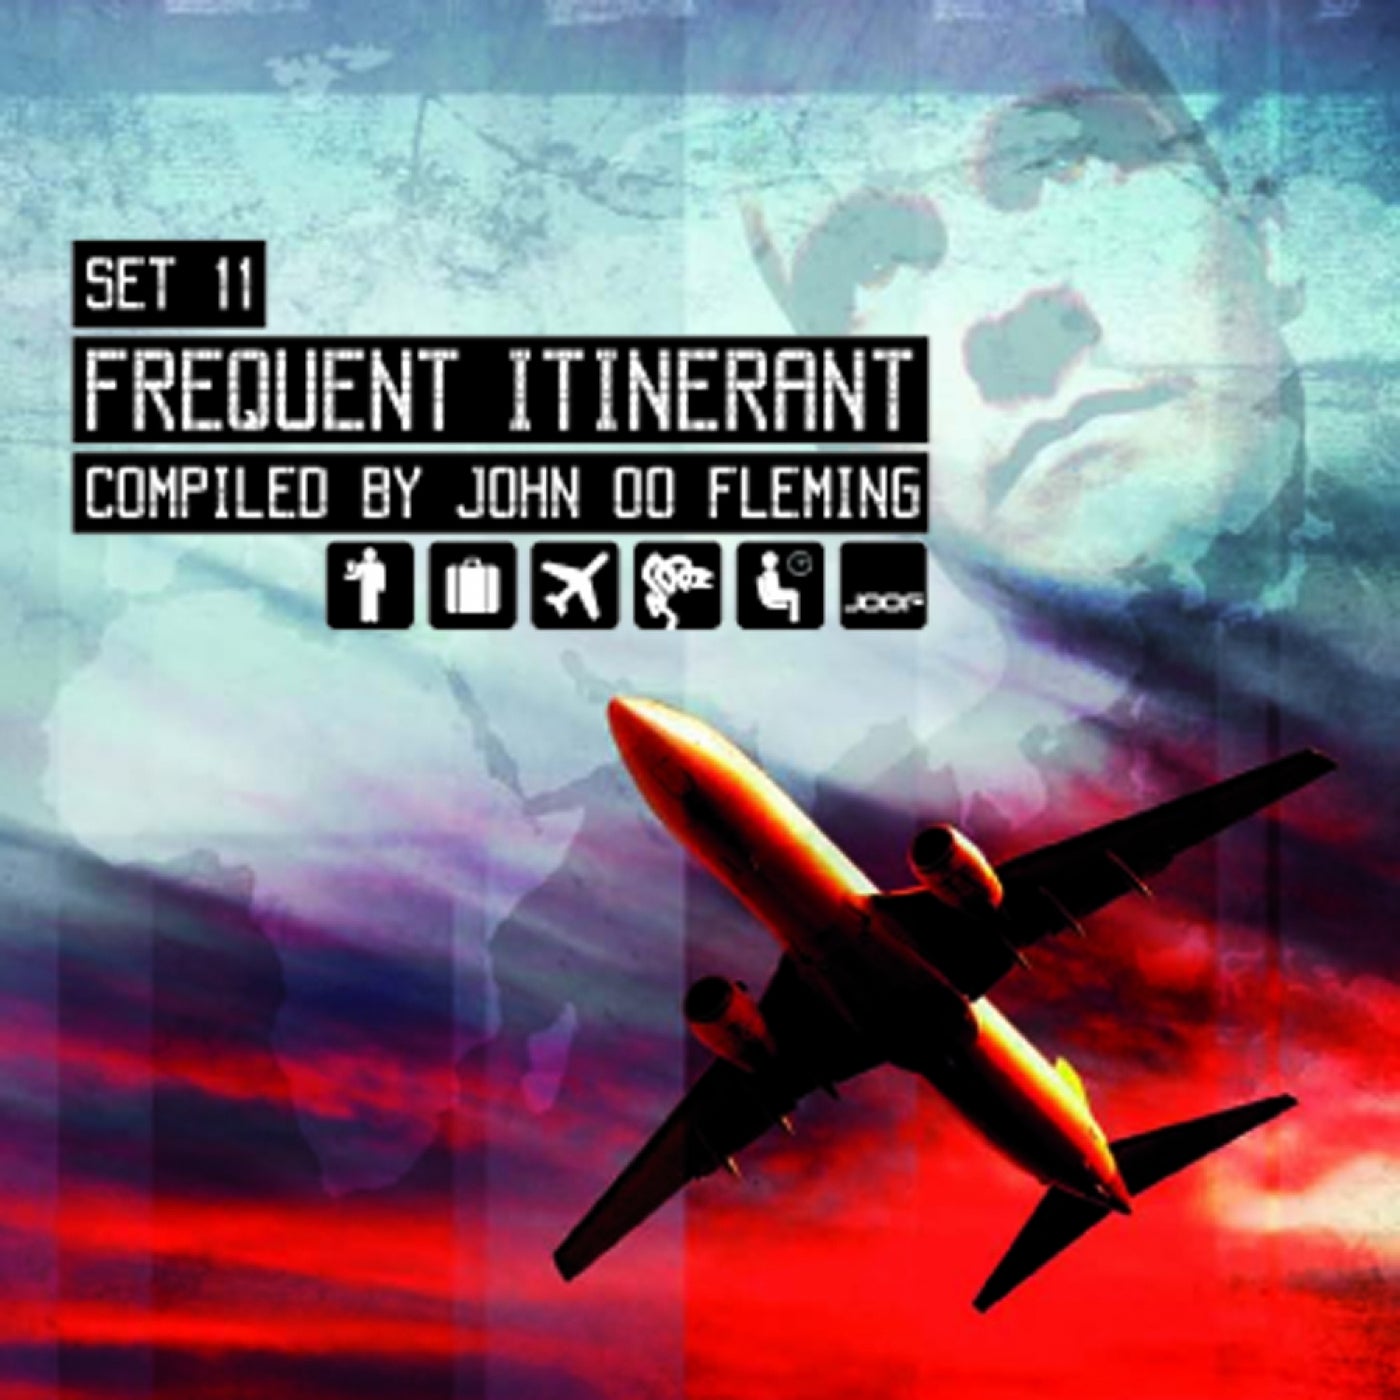 Set11: Frequent Itinerant